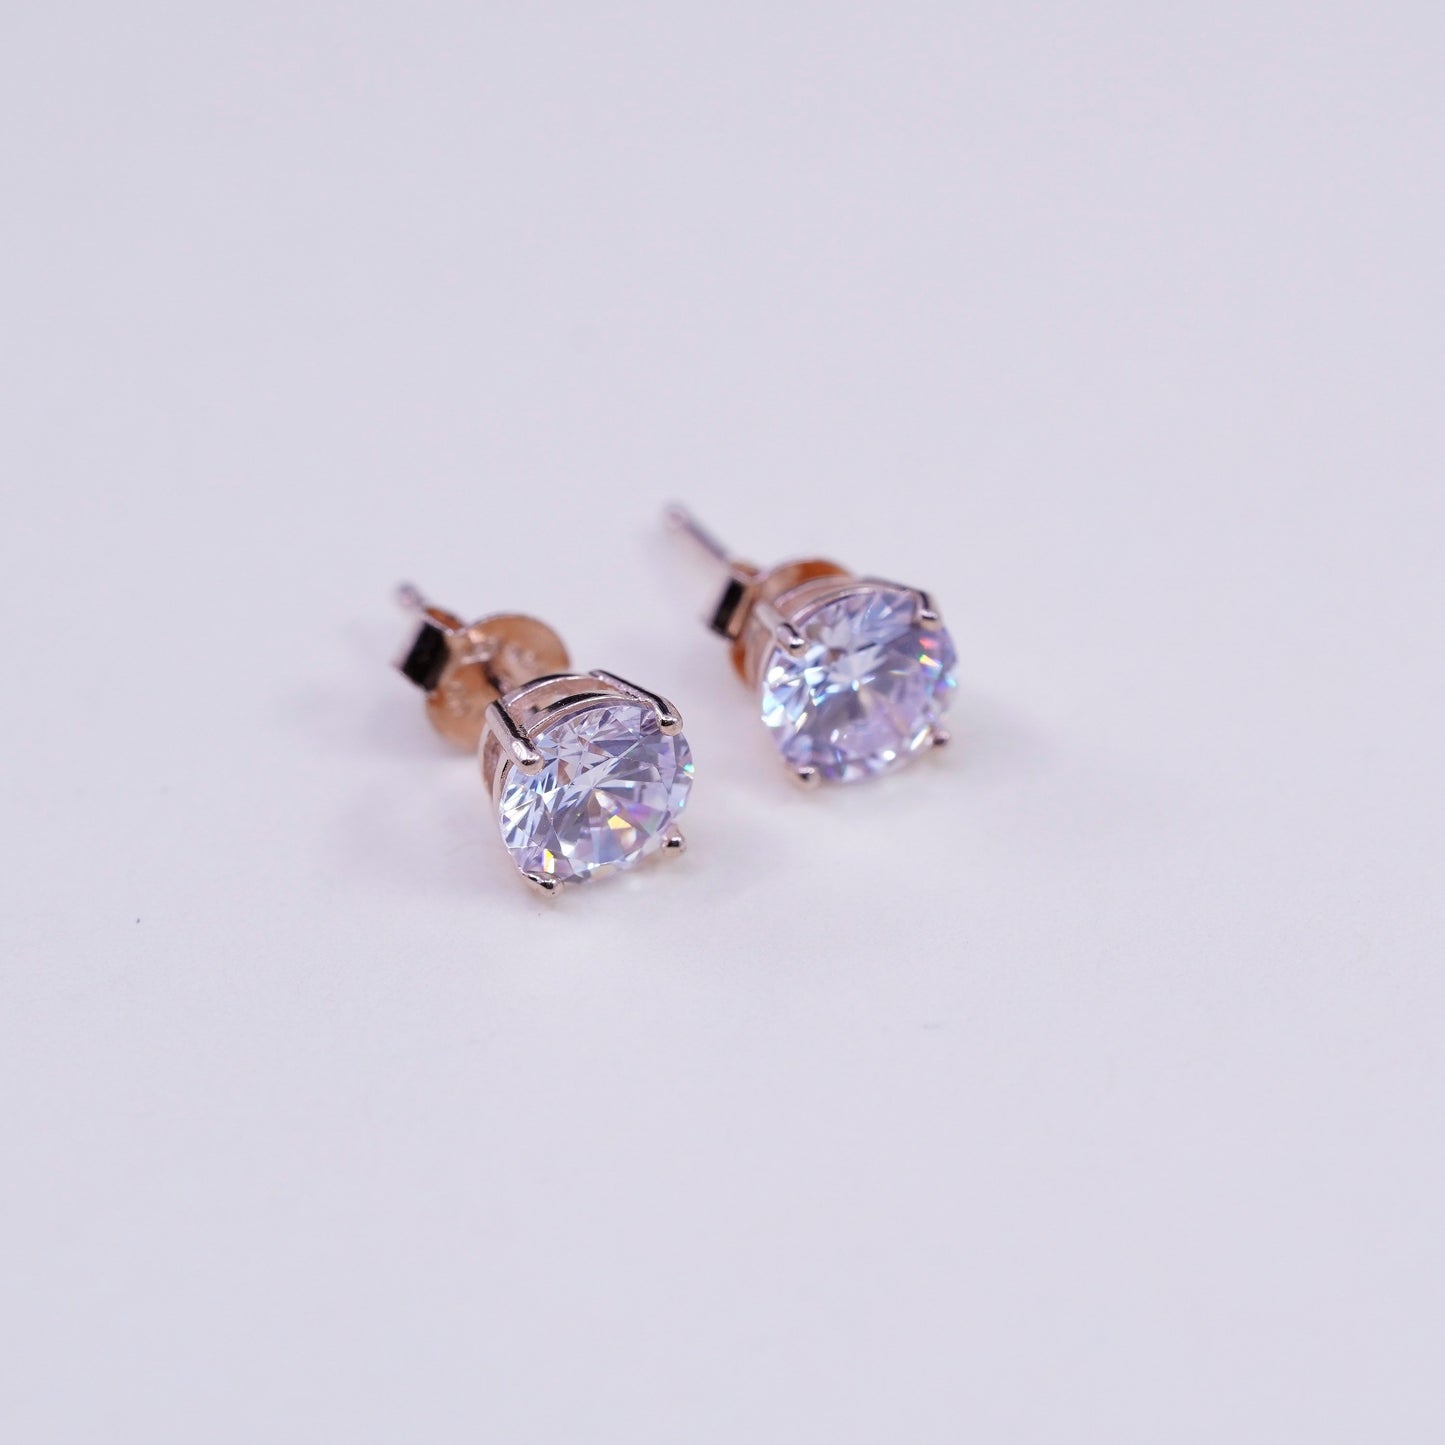 5mm, Vintage rose gold over sterling 925 silver cz studs, minimalist earrings